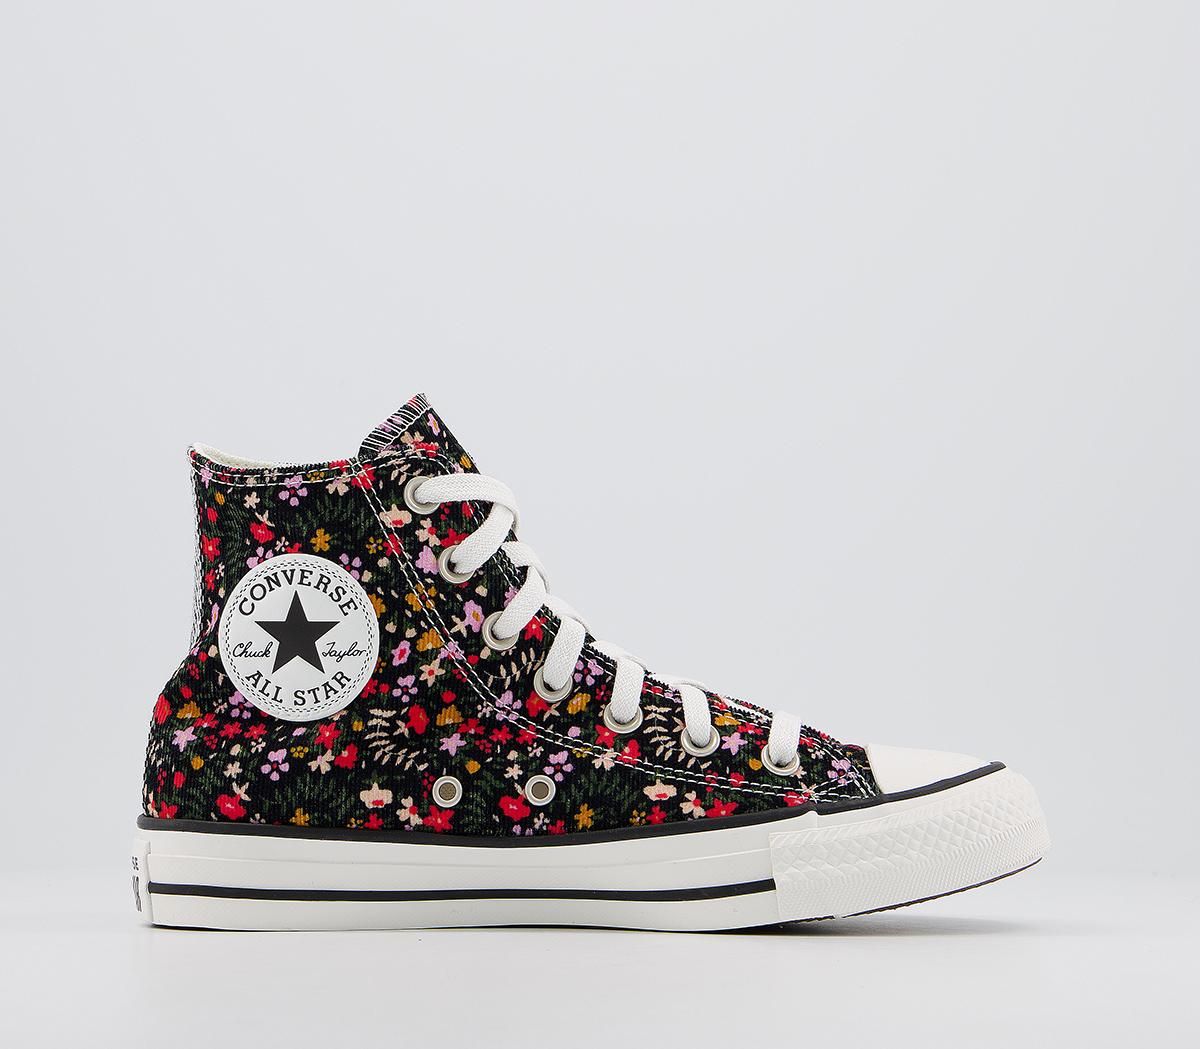 Converse All Star Hi Trainers | OFFICE London (UK)